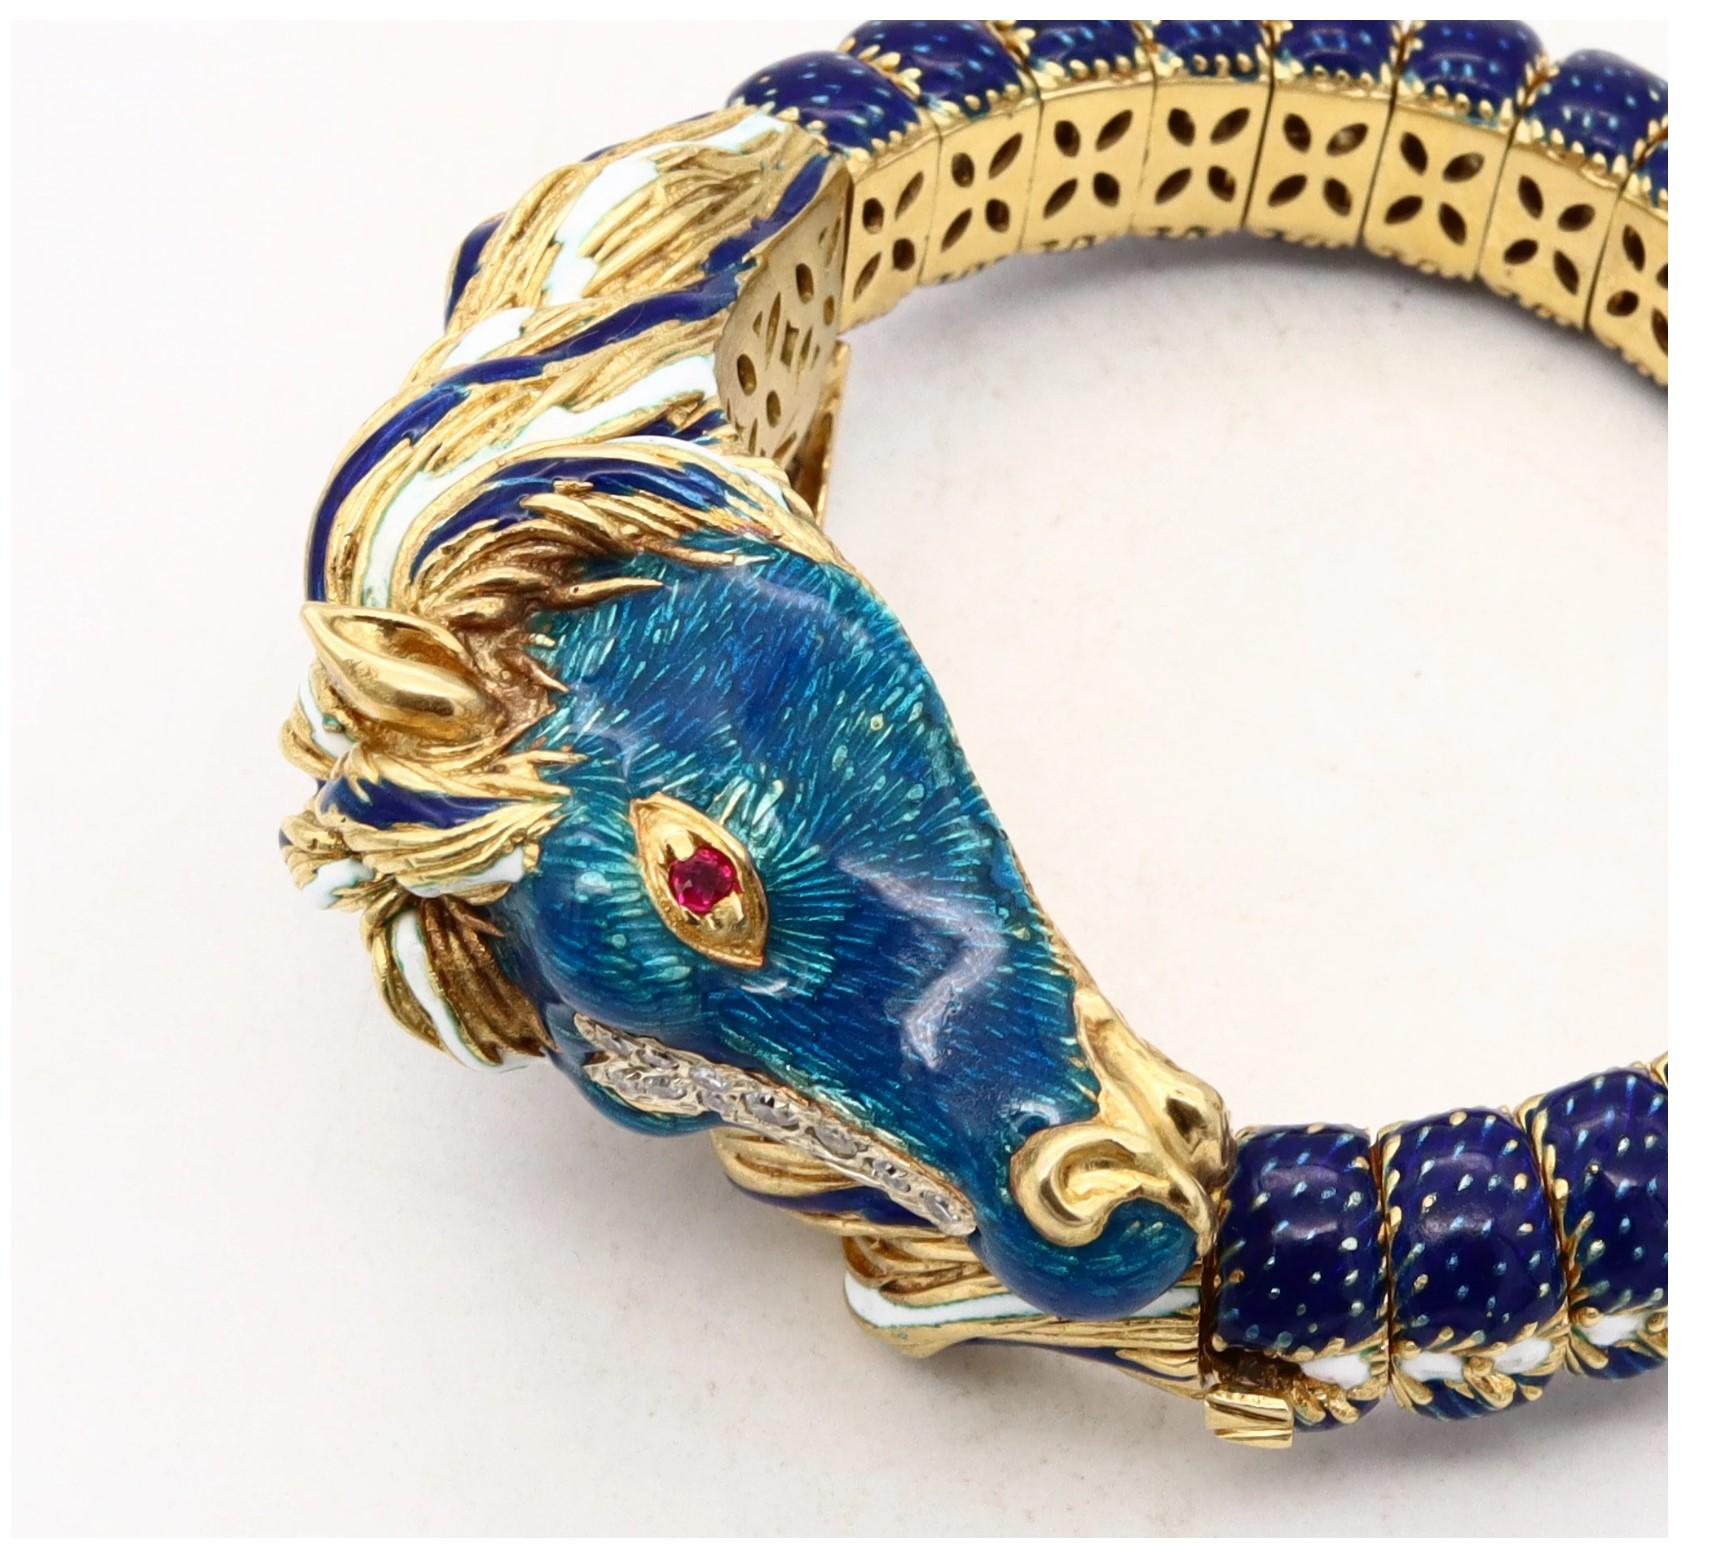 Incredible jeweled bracelet designed by Pierino Frascarolo (1928-1976).

A fantastic highly sculptured bracelet cuff from the bestiary collection, created by the famed Italian jeweler and designer, Pierino Frascarolo. This impressive and intricate